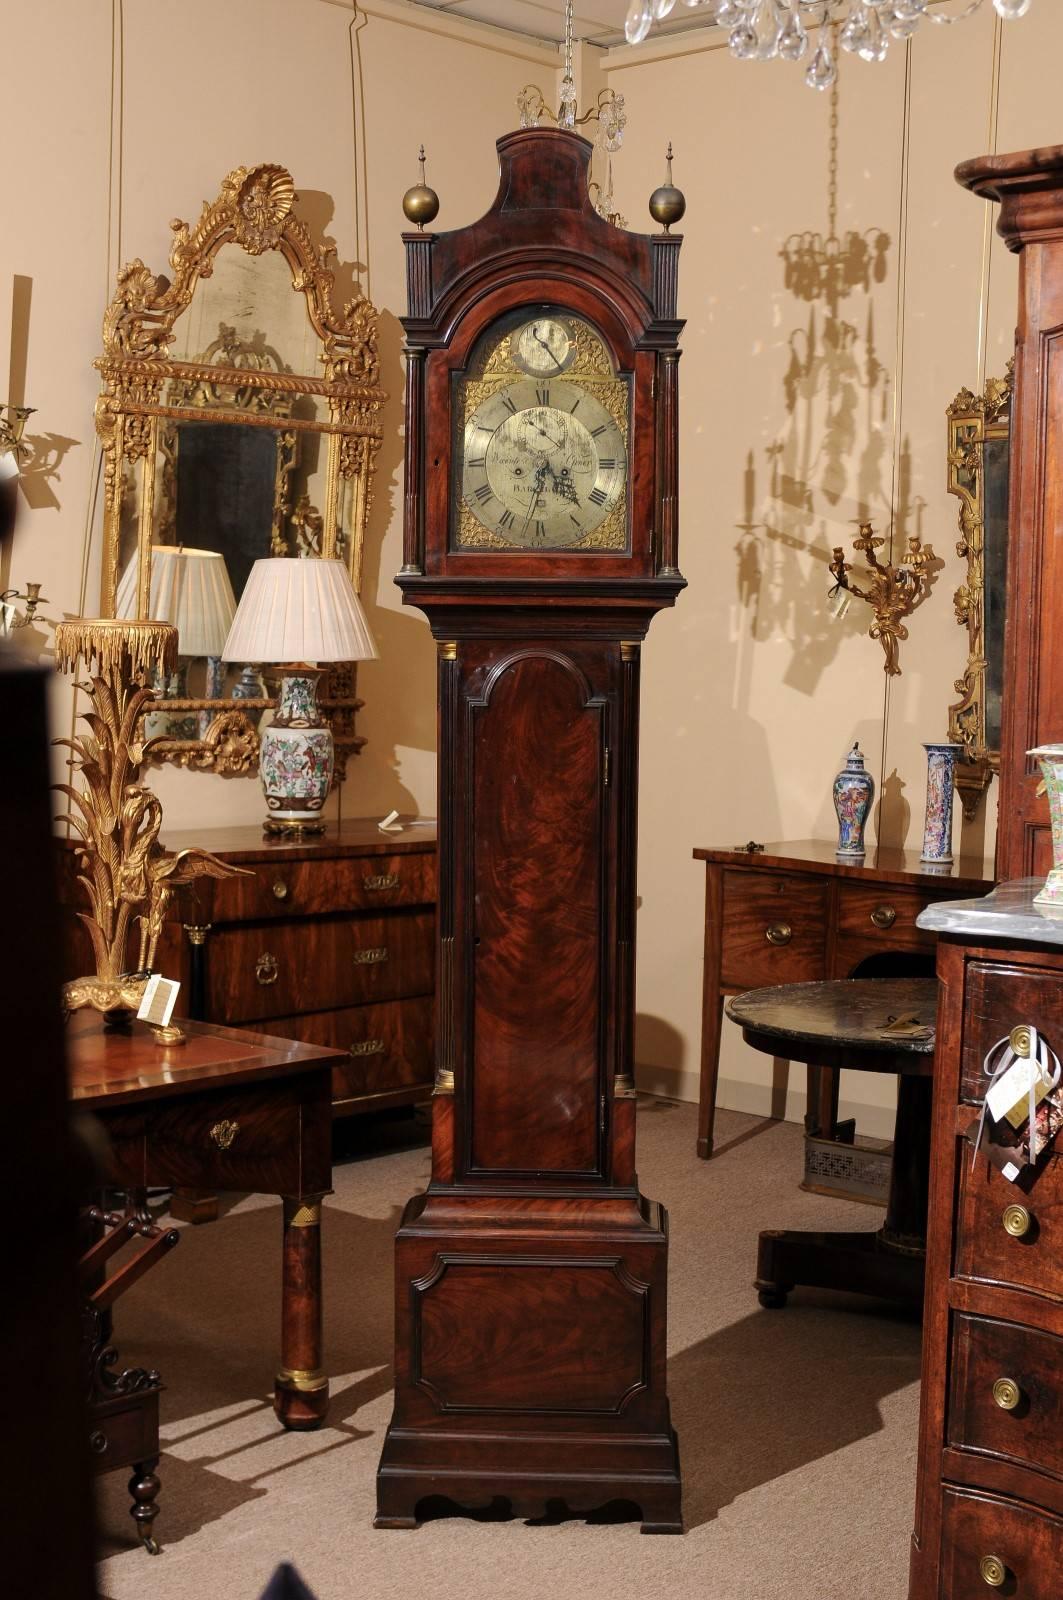 English mahogany tall case clock with bonnet top featuring two (2) finials and brass clock face signed by clockmaker 